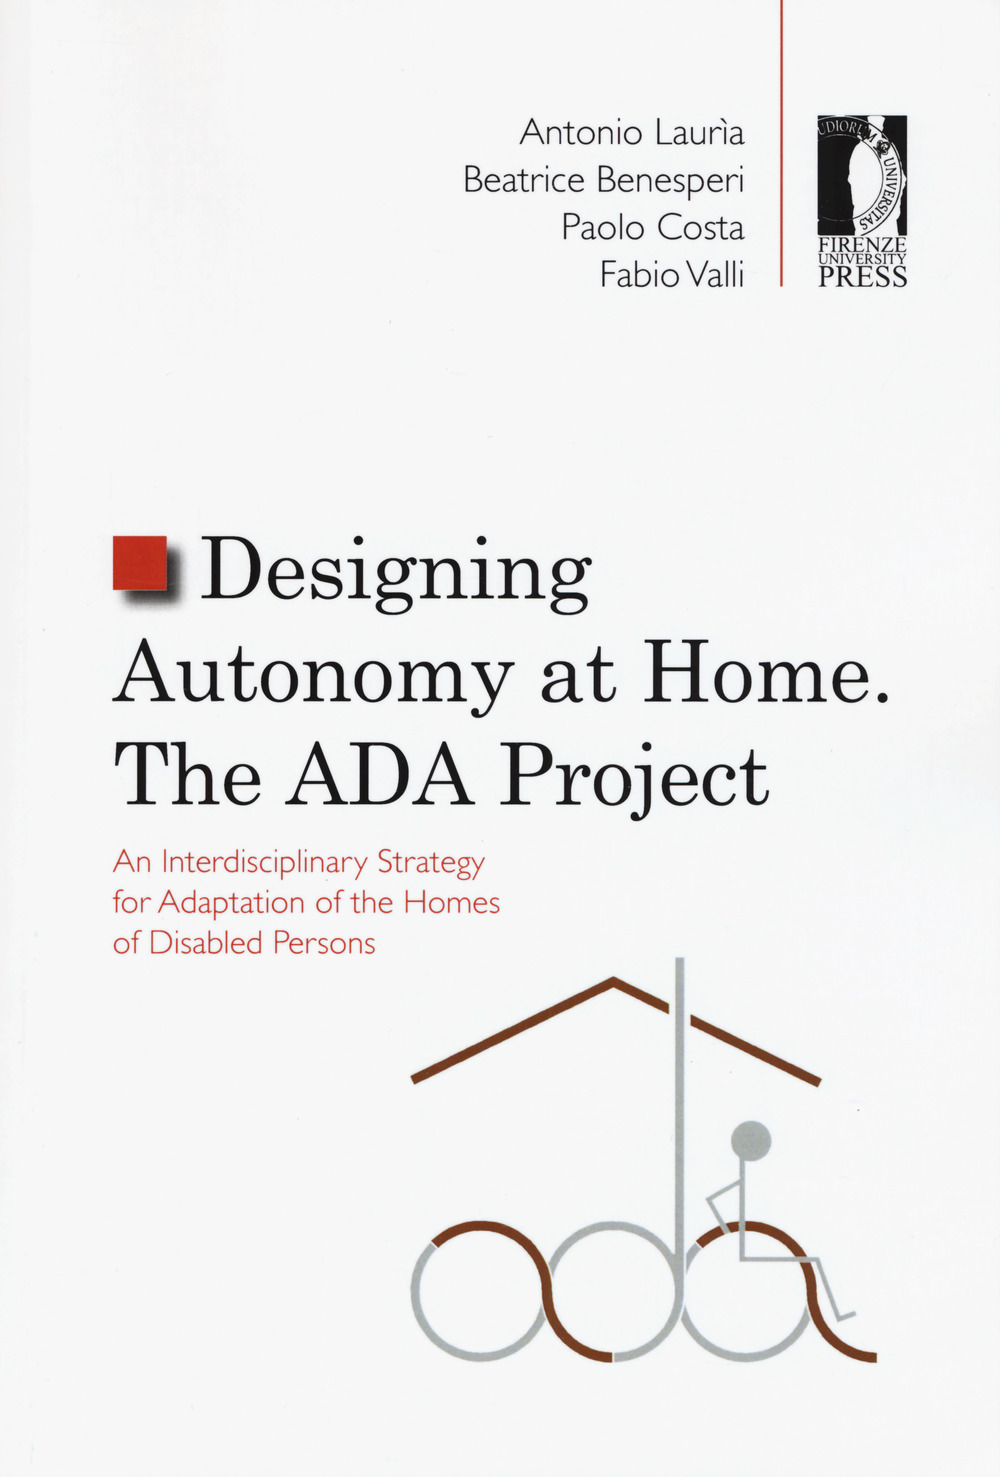 Designing autonomy at home. The ADA project. An interdisciplinary strategy for adaptation of the homes of disabled persons